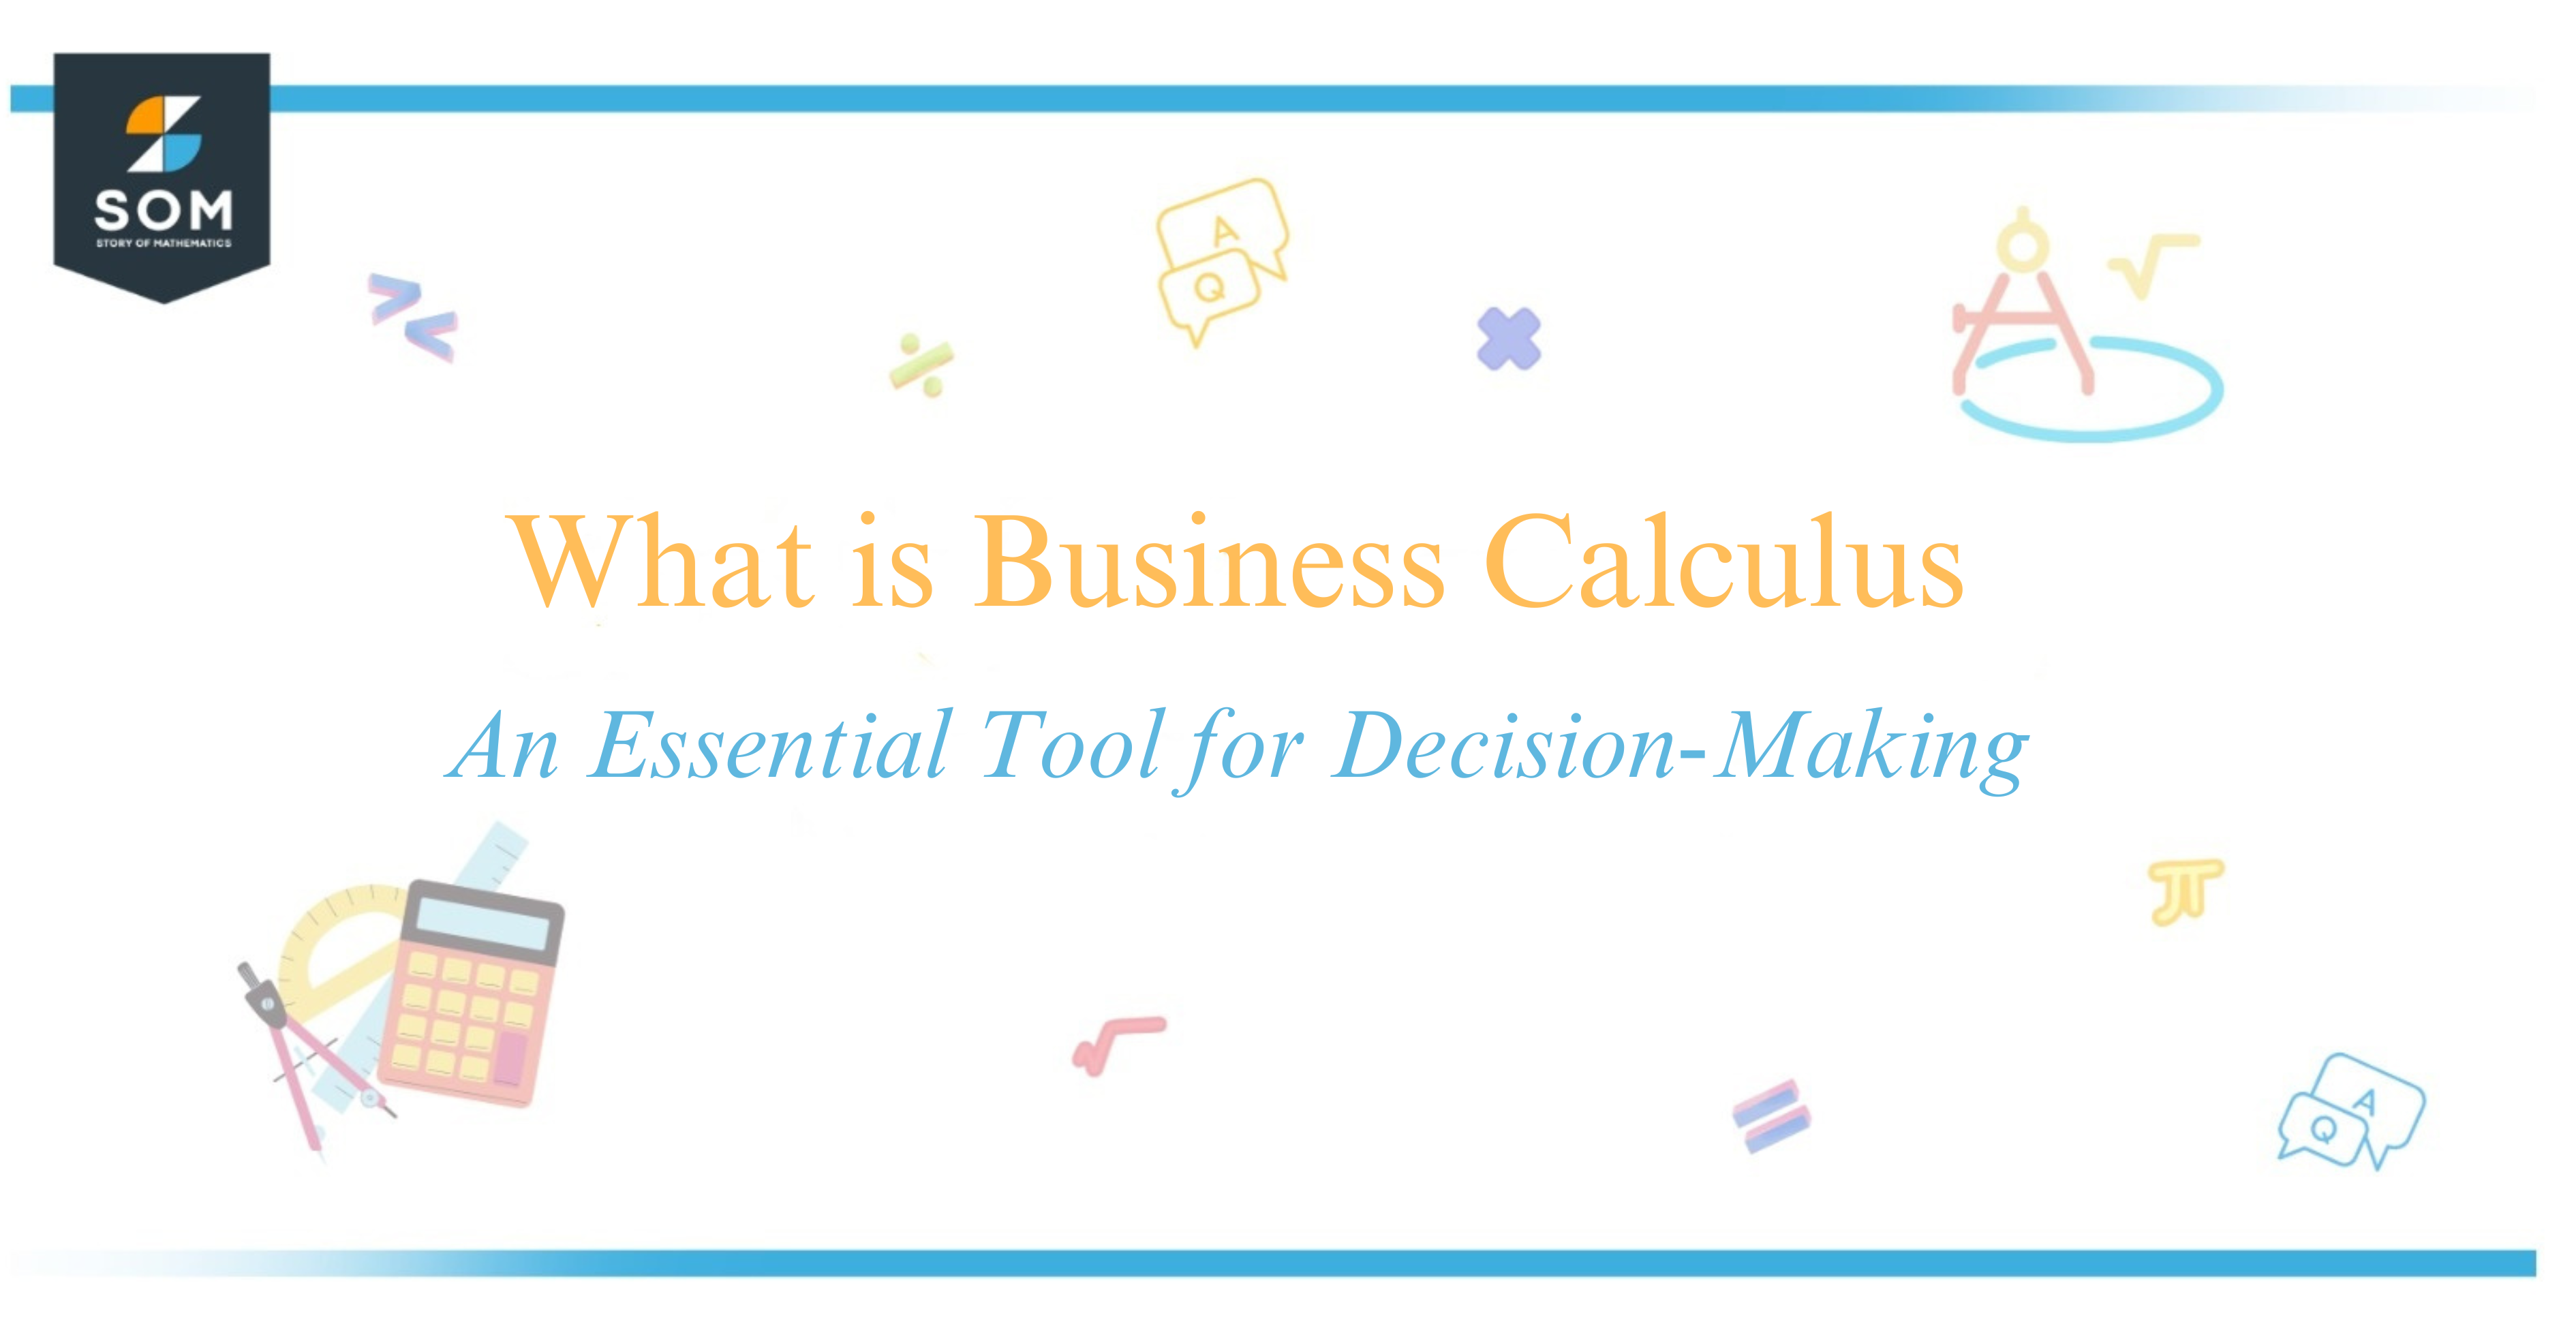 What is Business Calculus An Essential Tool for Decision-Making